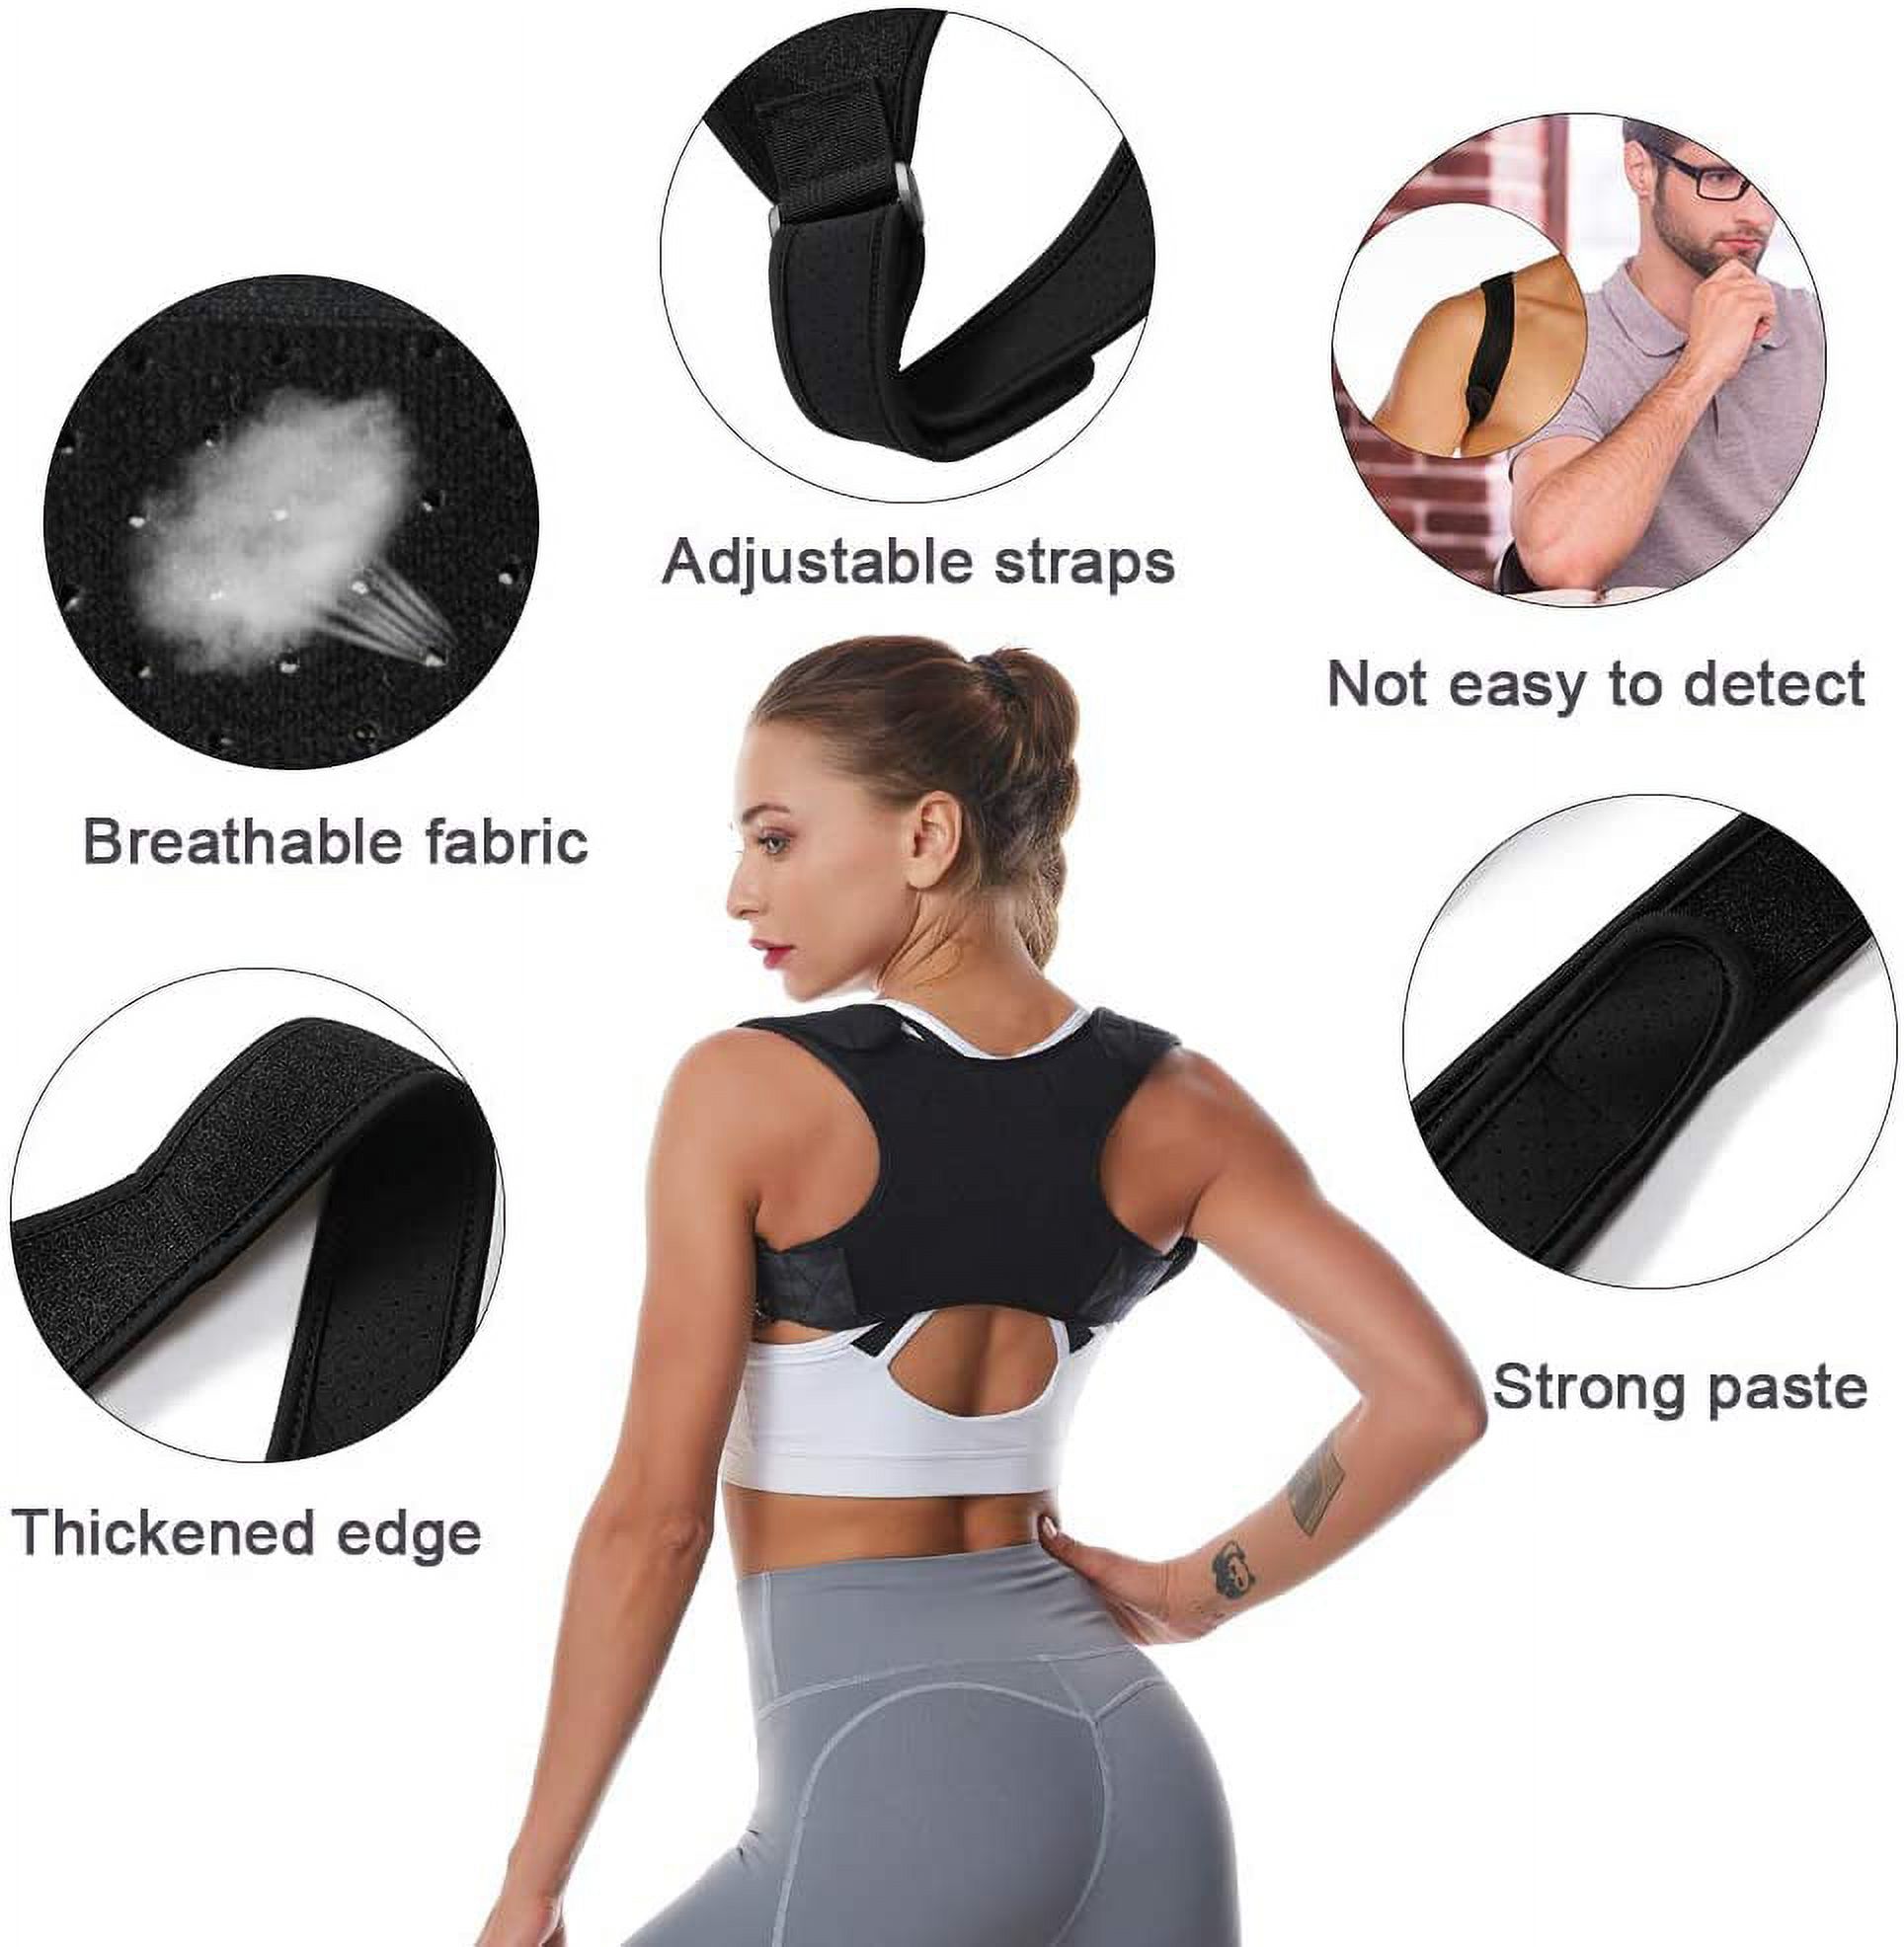 Posture Corrector for Women and Men - Adjustable Upper Back Brace - for Support and Providing Pain Relief from Neck,Back and Shoulder, Improve Eliminate Bad Posture for Correct Posture - image 2 of 6